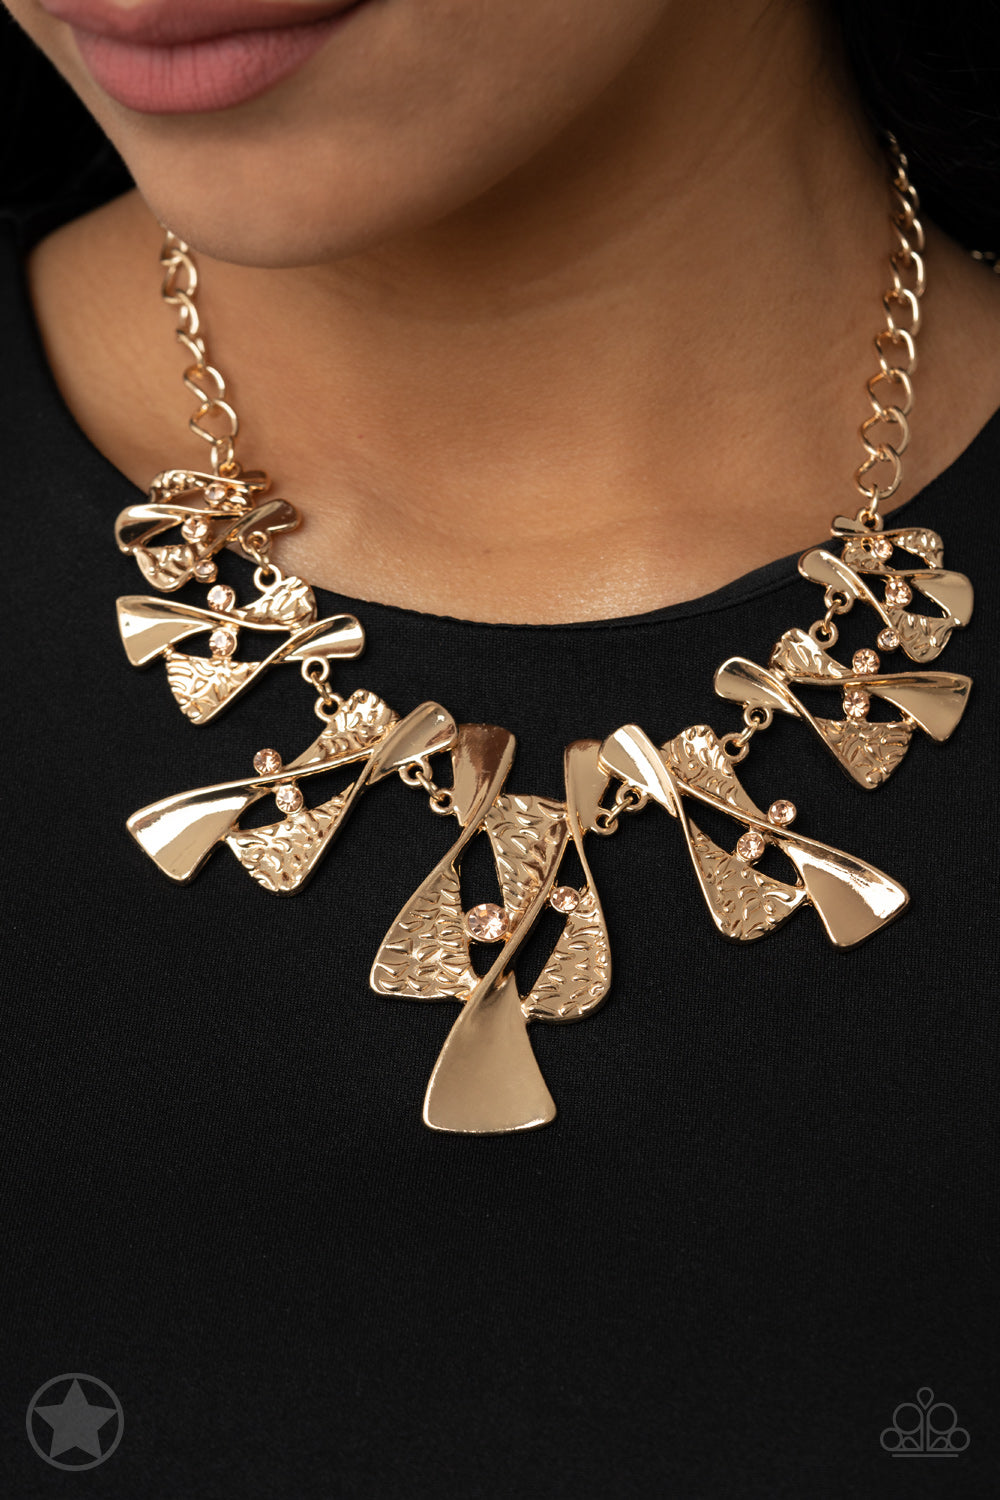 Paparazzi “The Sands of Time” - Gold Necklace Earring Set